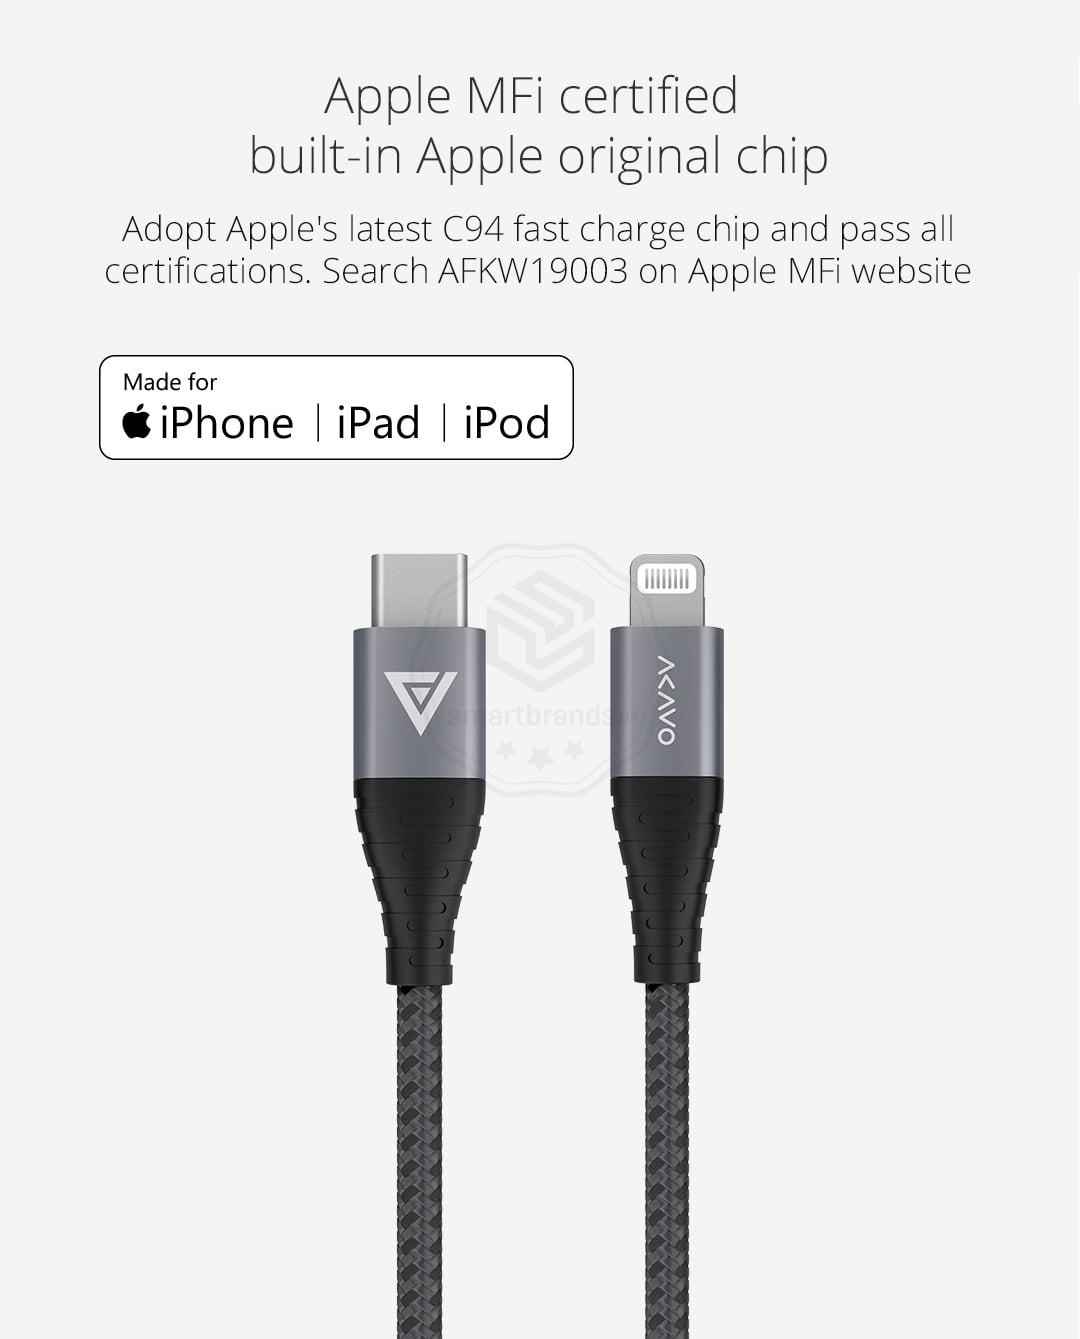 Adopt Apple's latest C94 fast charge chip and pass all certifications. Search AFKW19003 on Apple MFi website